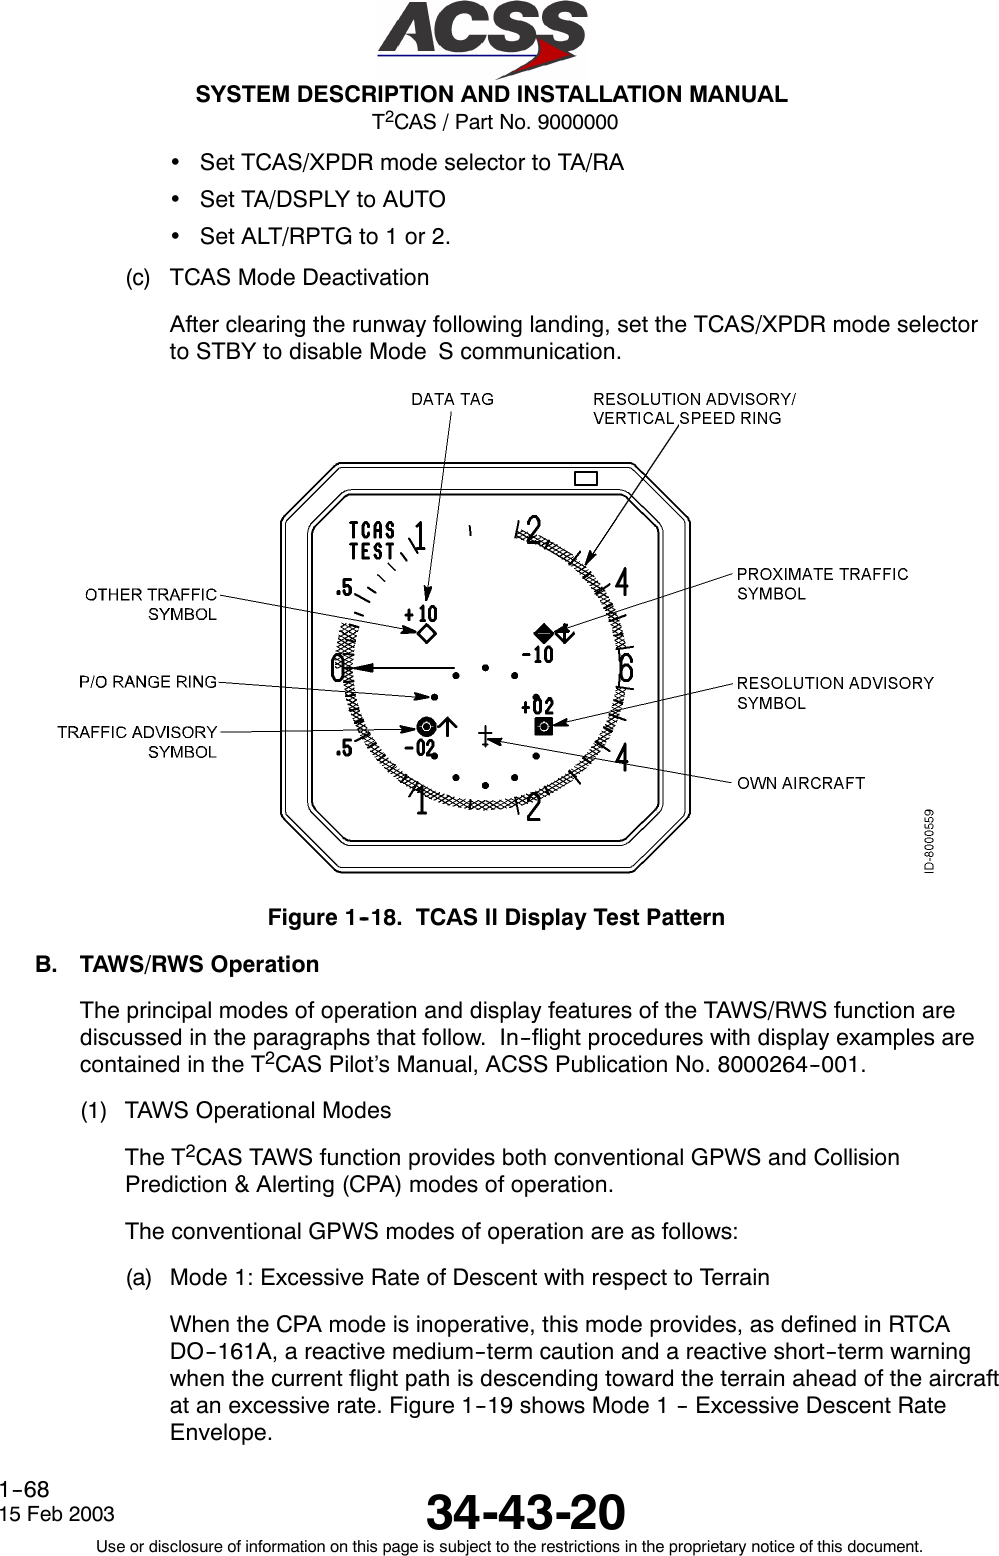 T2CAS / Part No. 9000000SYSTEM DESCRIPTION AND INSTALLATION MANUAL34-43-2015 Feb 2003Use or disclosure of information on this page is subject to the restrictions in the proprietary notice of this document.1--68•Set TCAS/XPDR mode selector to TA/RA•Set TA/DSPLY to AUTO•Set ALT/RPTG to 1 or 2.(c) TCAS Mode DeactivationAfter clearing the runway following landing, set the TCAS/XPDR mode selectorto STBY to disable Mode S communication.Figure 1--18. TCAS ll Display Test PatternB. TAWS/RWS OperationThe principal modes of operation and display features of the TAWS/RWS function arediscussed in the paragraphs that follow. In--flight procedures with display examples arecontained in the T2CAS Pilot’s Manual, ACSS Publication No. 8000264--001.(1) TAWS Operational ModesThe T2CAS TAWS function provides both conventional GPWS and CollisionPrediction &amp; Alerting (CPA) modes of operation.The conventional GPWS modes of operation are as follows:(a) Mode 1: Excessive Rate of Descent with respect to TerrainWhen the CPA mode is inoperative, this mode provides, as defined in RTCADO--161A, a reactive medium--term caution and a reactive short--term warningwhen the current flight path is descending toward the terrain ahead of the aircraftat an excessive rate. Figure 1--19 shows Mode 1 -- Excessive Descent RateEnvelope.